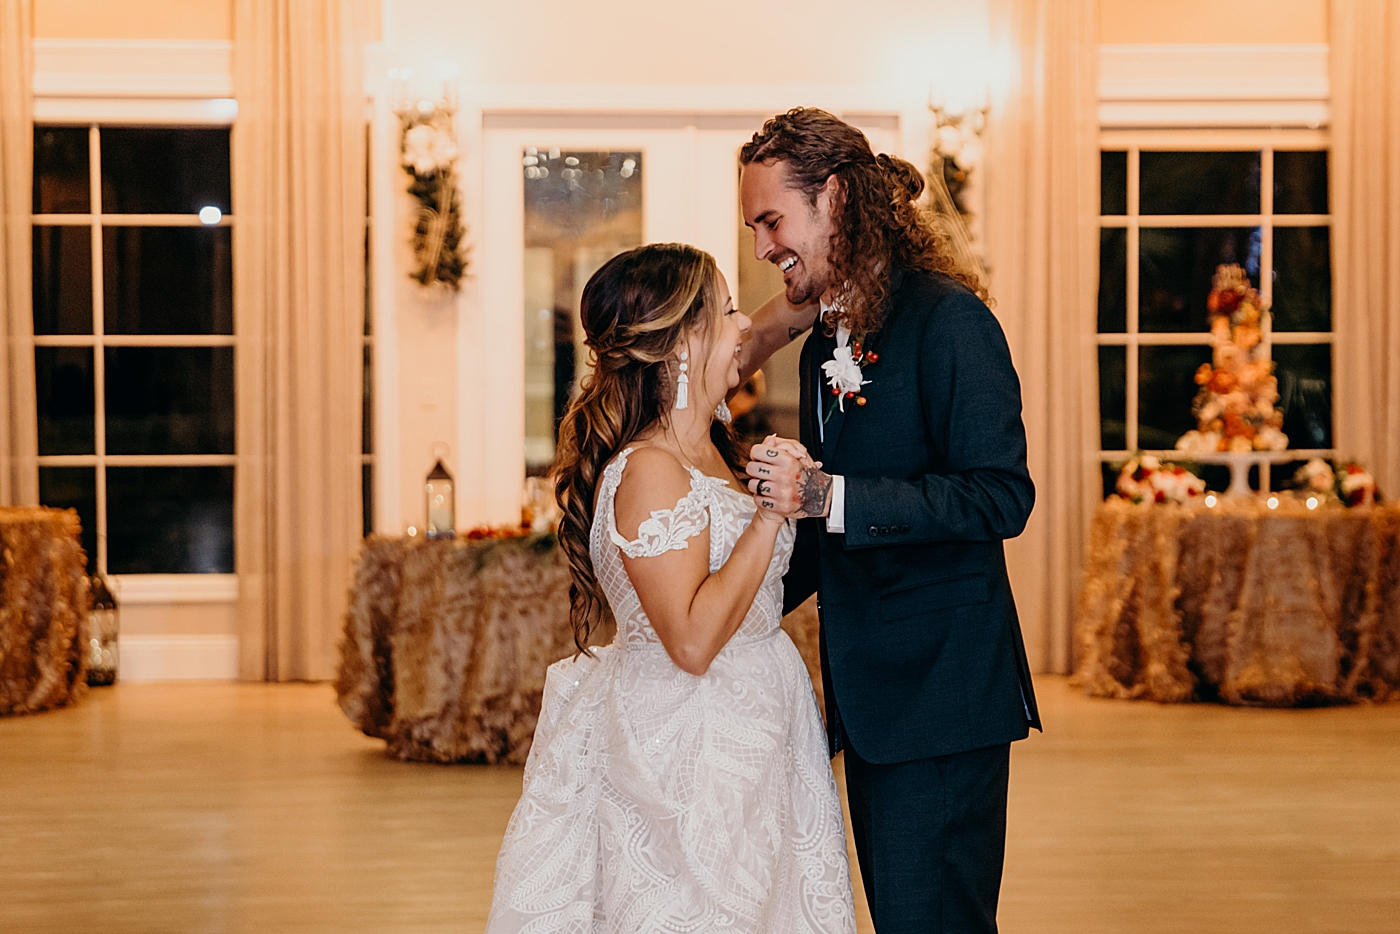 Bride and Groom first dance Benvenuto Restaurant Wedding Photography captured by South Florida Wedding Photographer Maggie Alvarez Photography